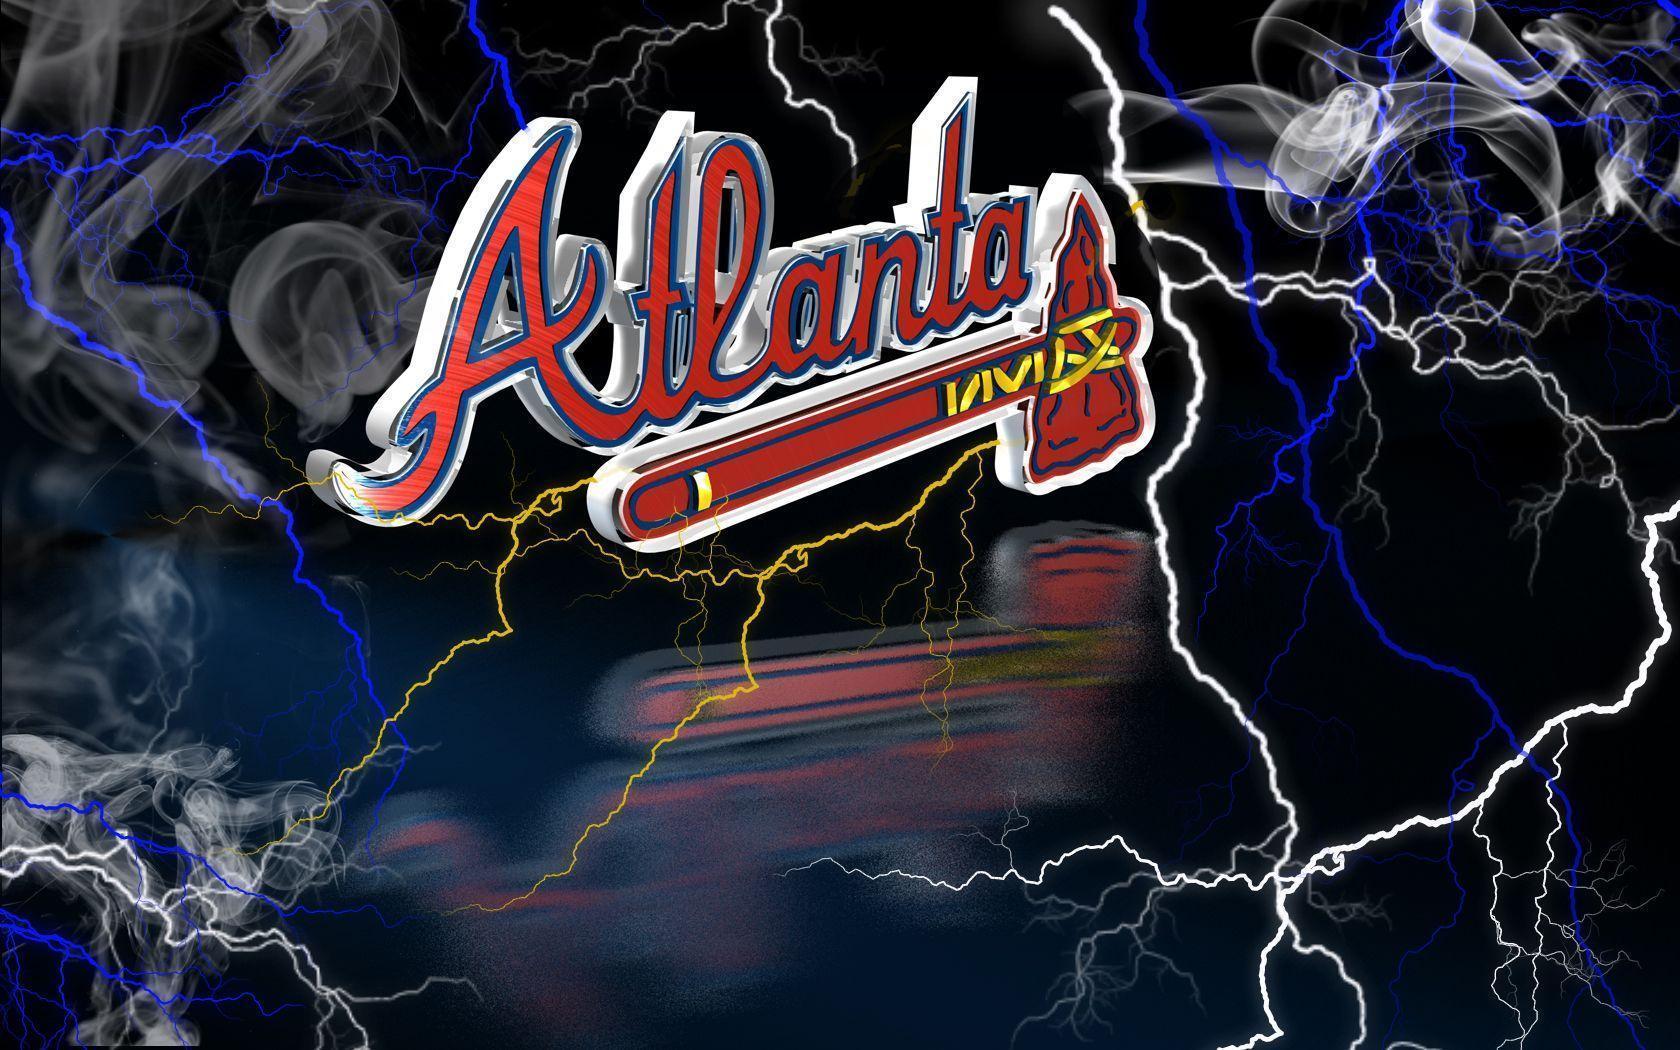 Download wallpapers Atlanta Braves emblem glitter logo MLB red blue  checkered background american baseball team Major League Baseball mosaic  art baseball Atlanta Braves for desktop with resolution 2880x1800 High  Quality HD pictures